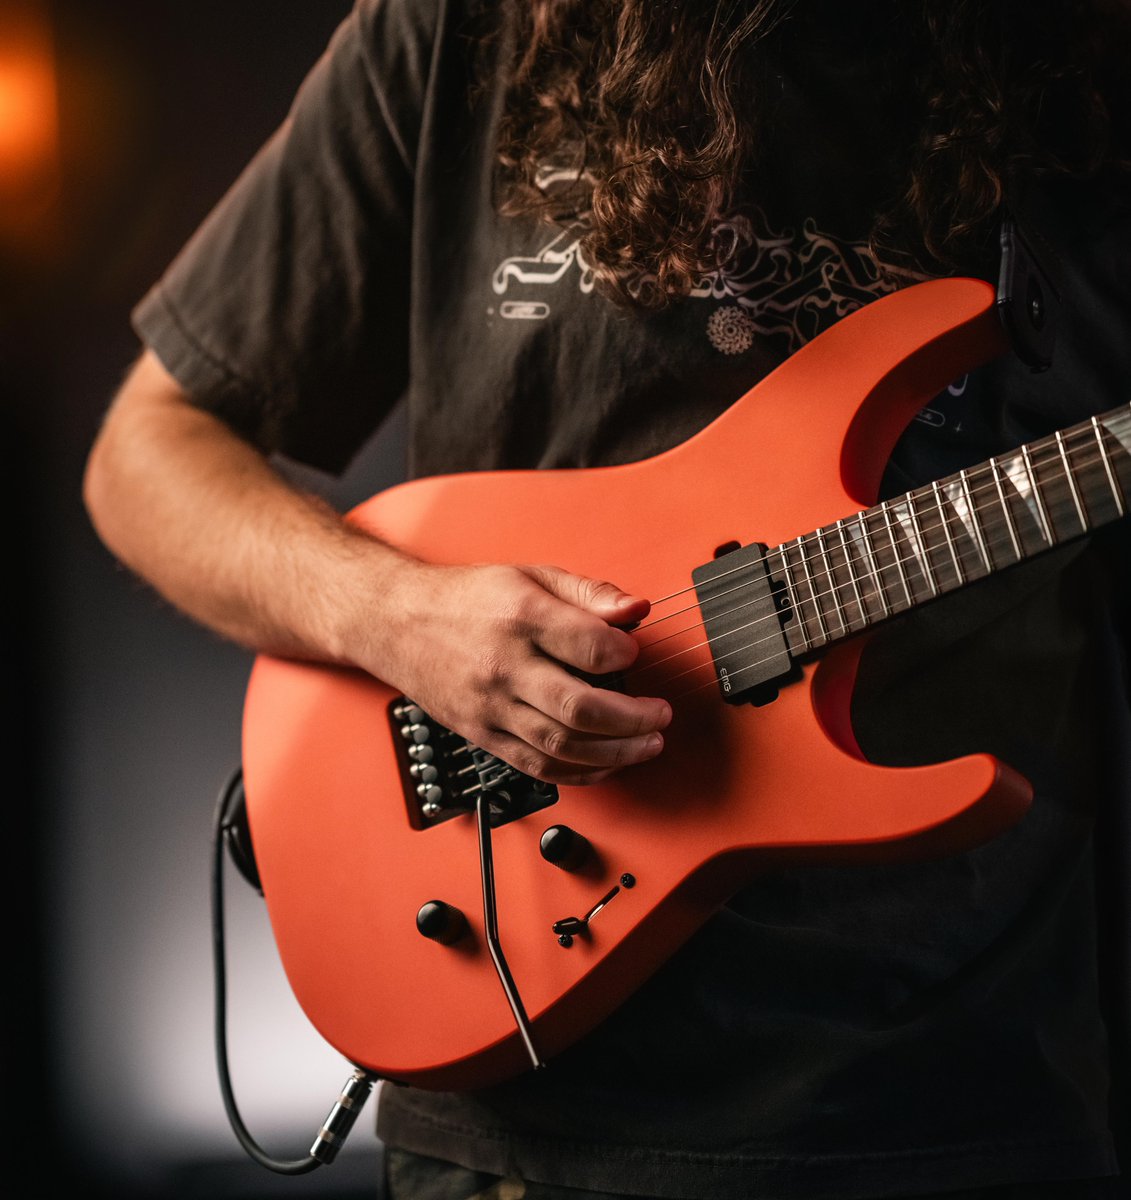 Finished in a Satin Lambo Orange and infused with features like Stainless Steel frets and a through-body three-piece maple neck with graphite reinforcement — the American Series SL2 is catered to high-velocity playing. See the full rundown: bit.ly/4aR3Gwn